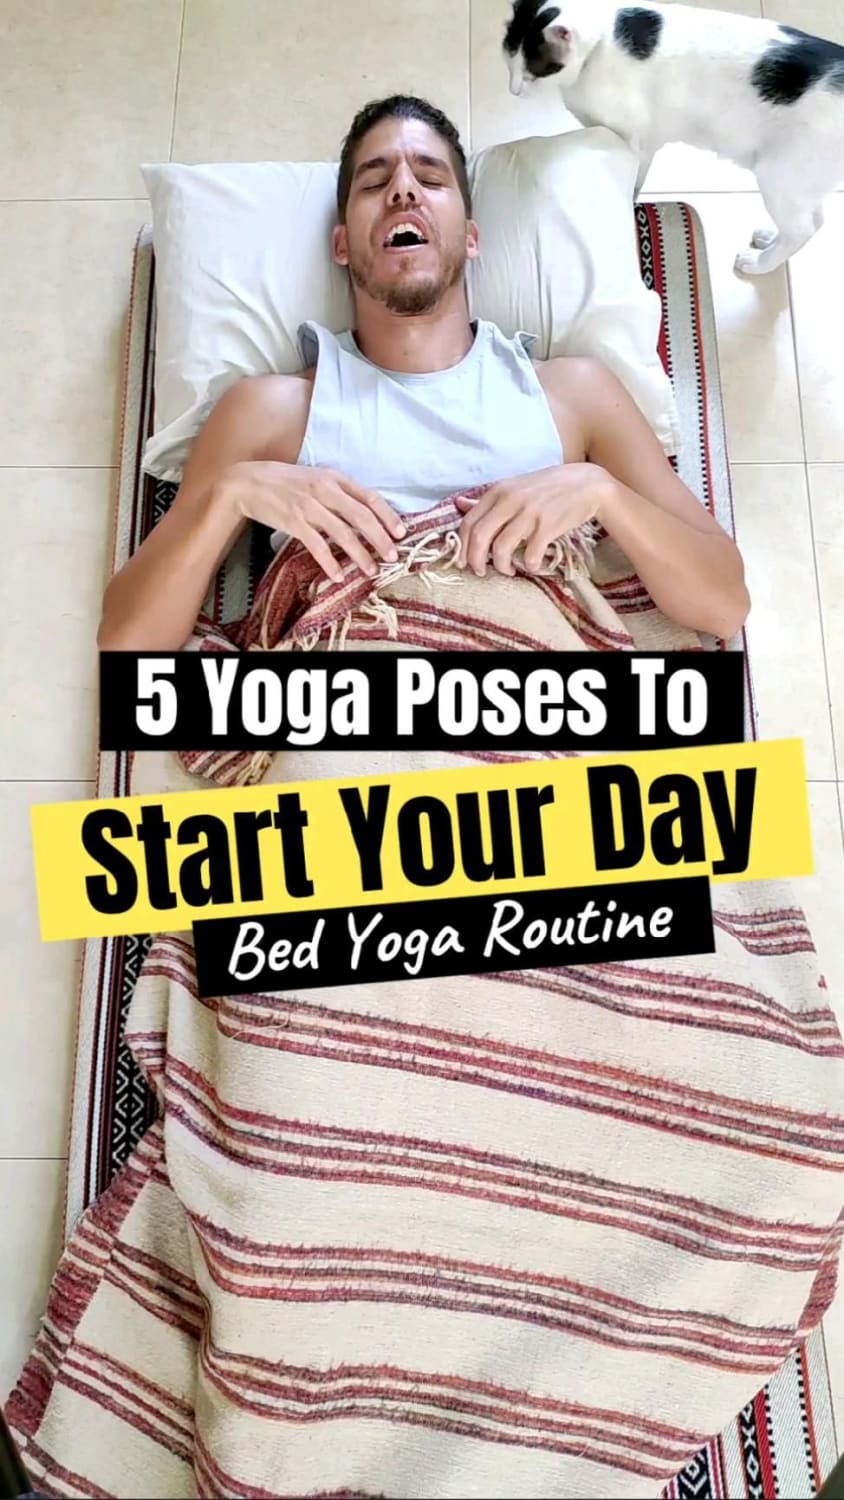 Morning bed-yoga routine to start the day